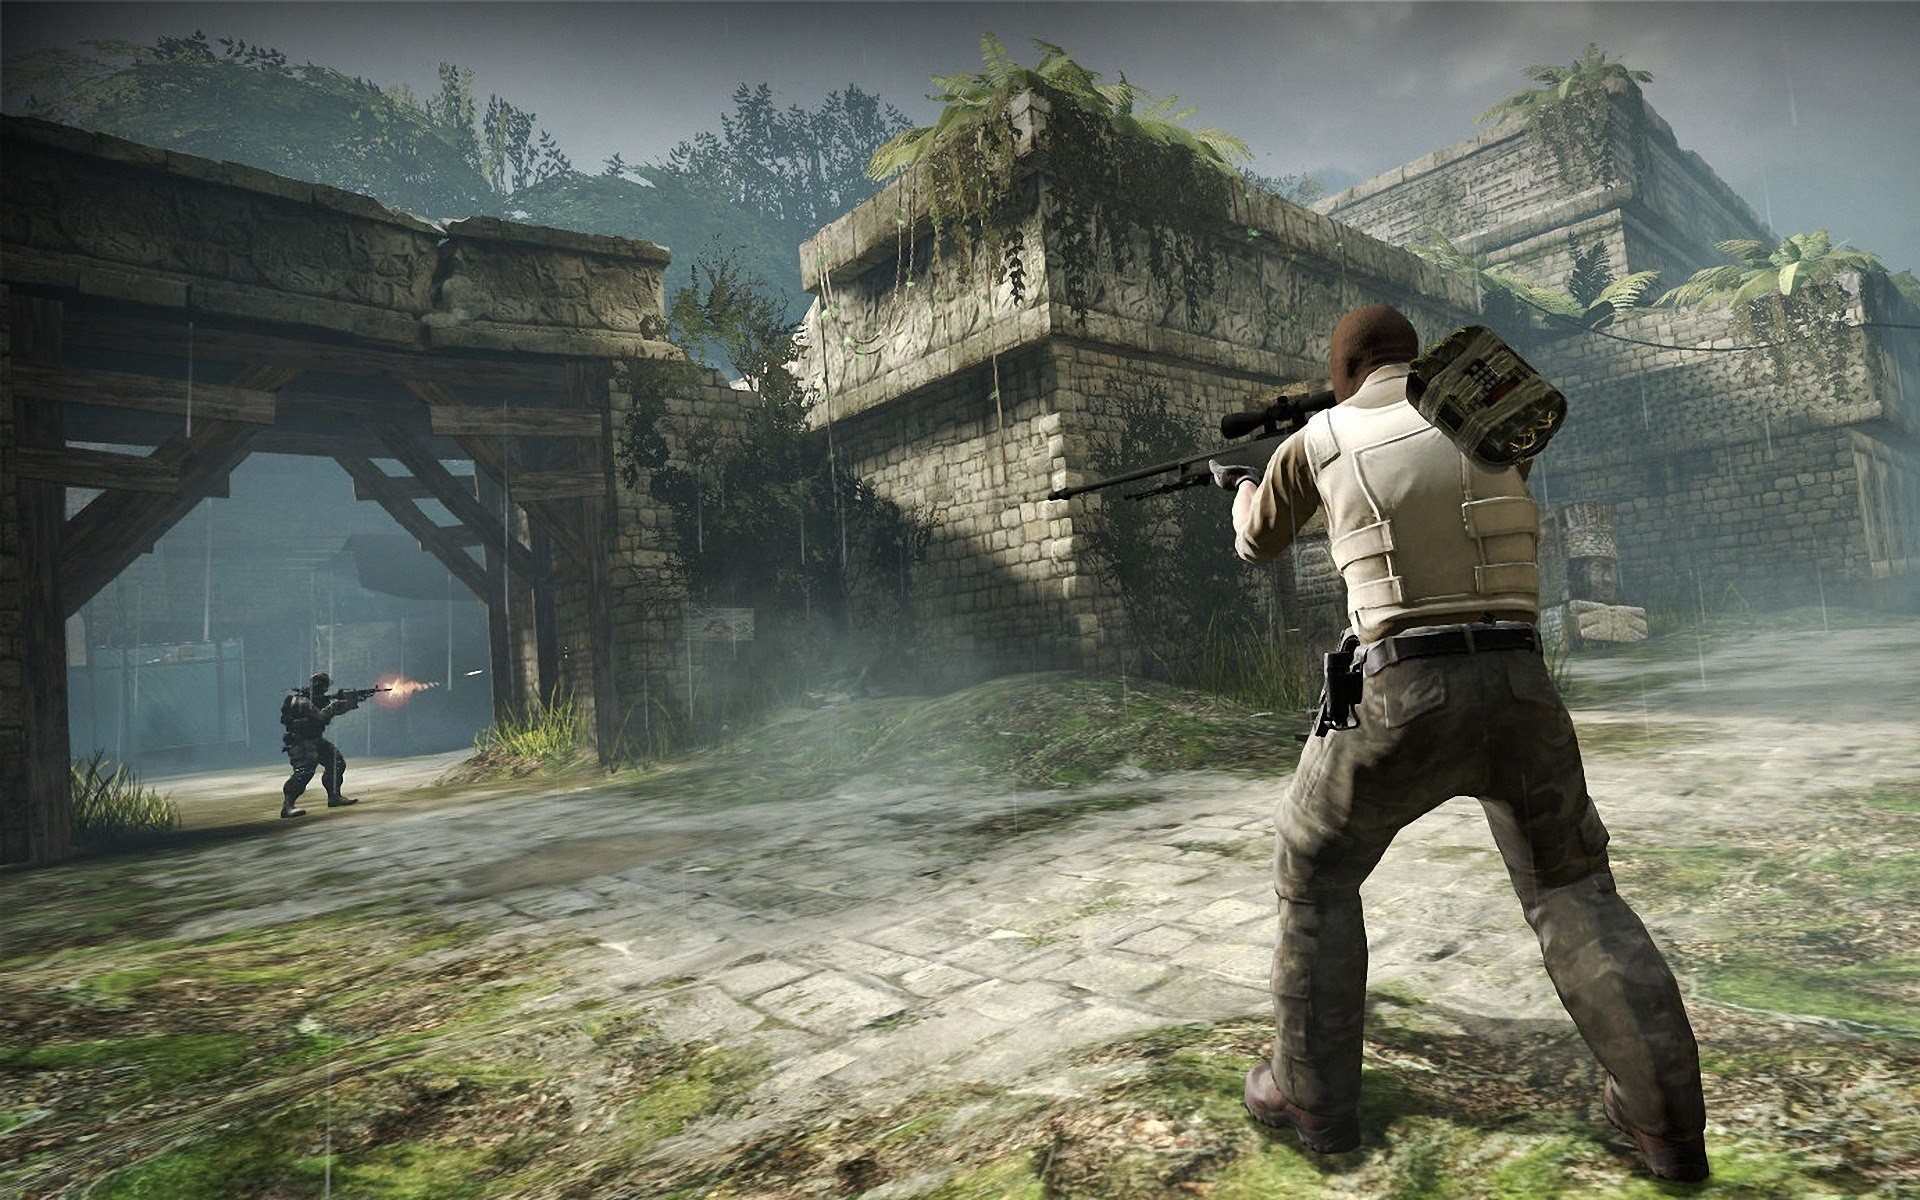 Download wallpaper: Counter Strike: Global Offensive 1366x768